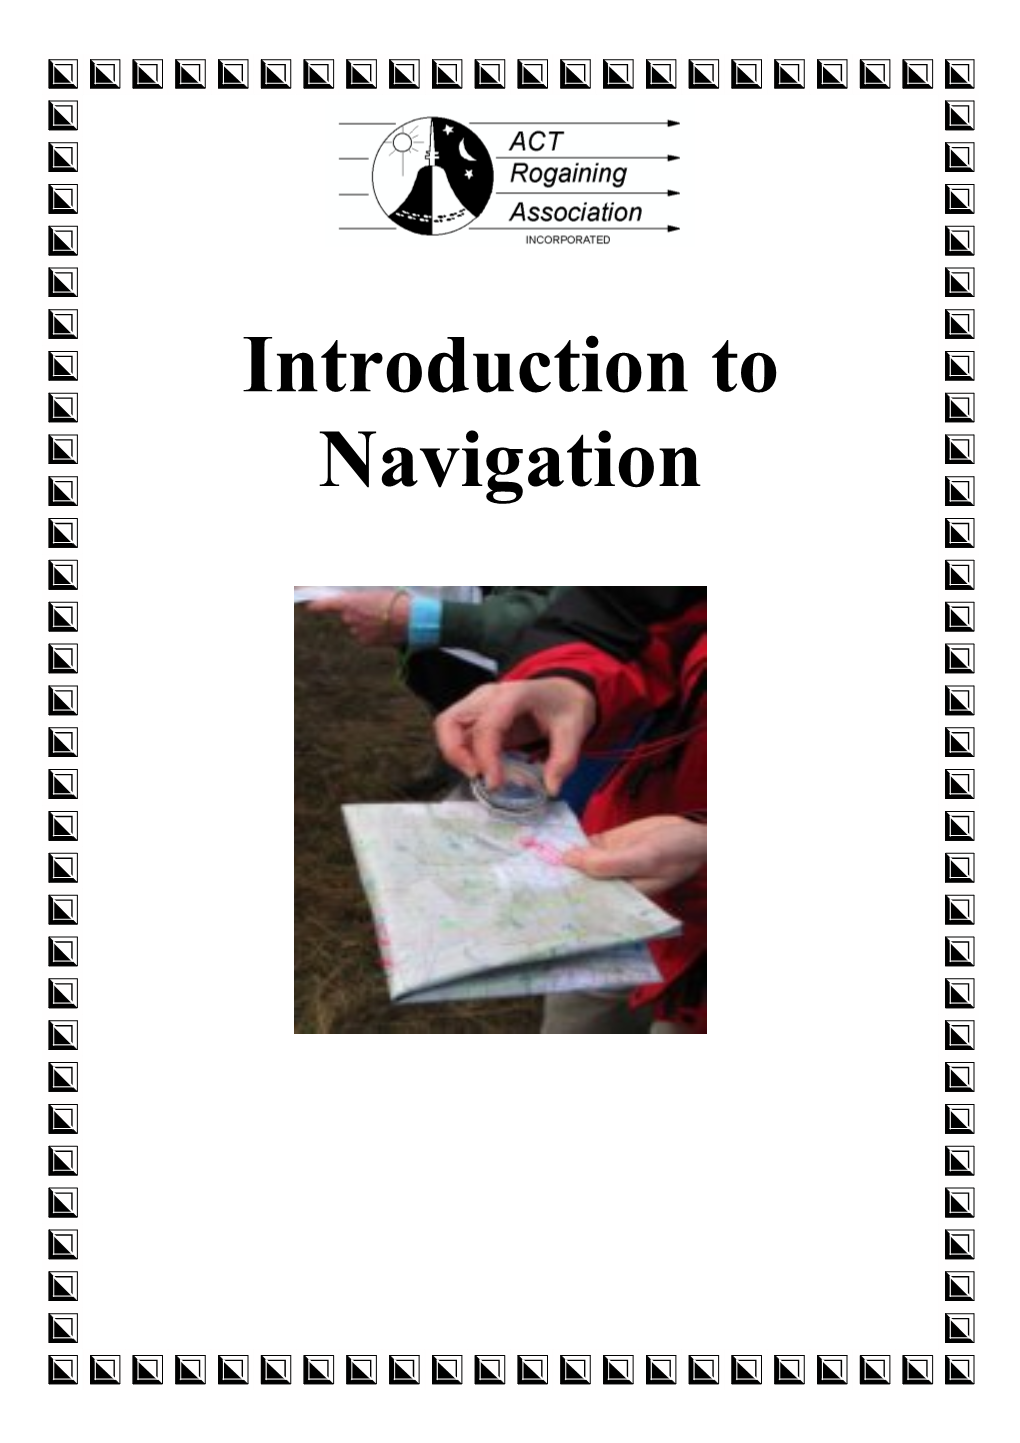 Introduction to Navigation